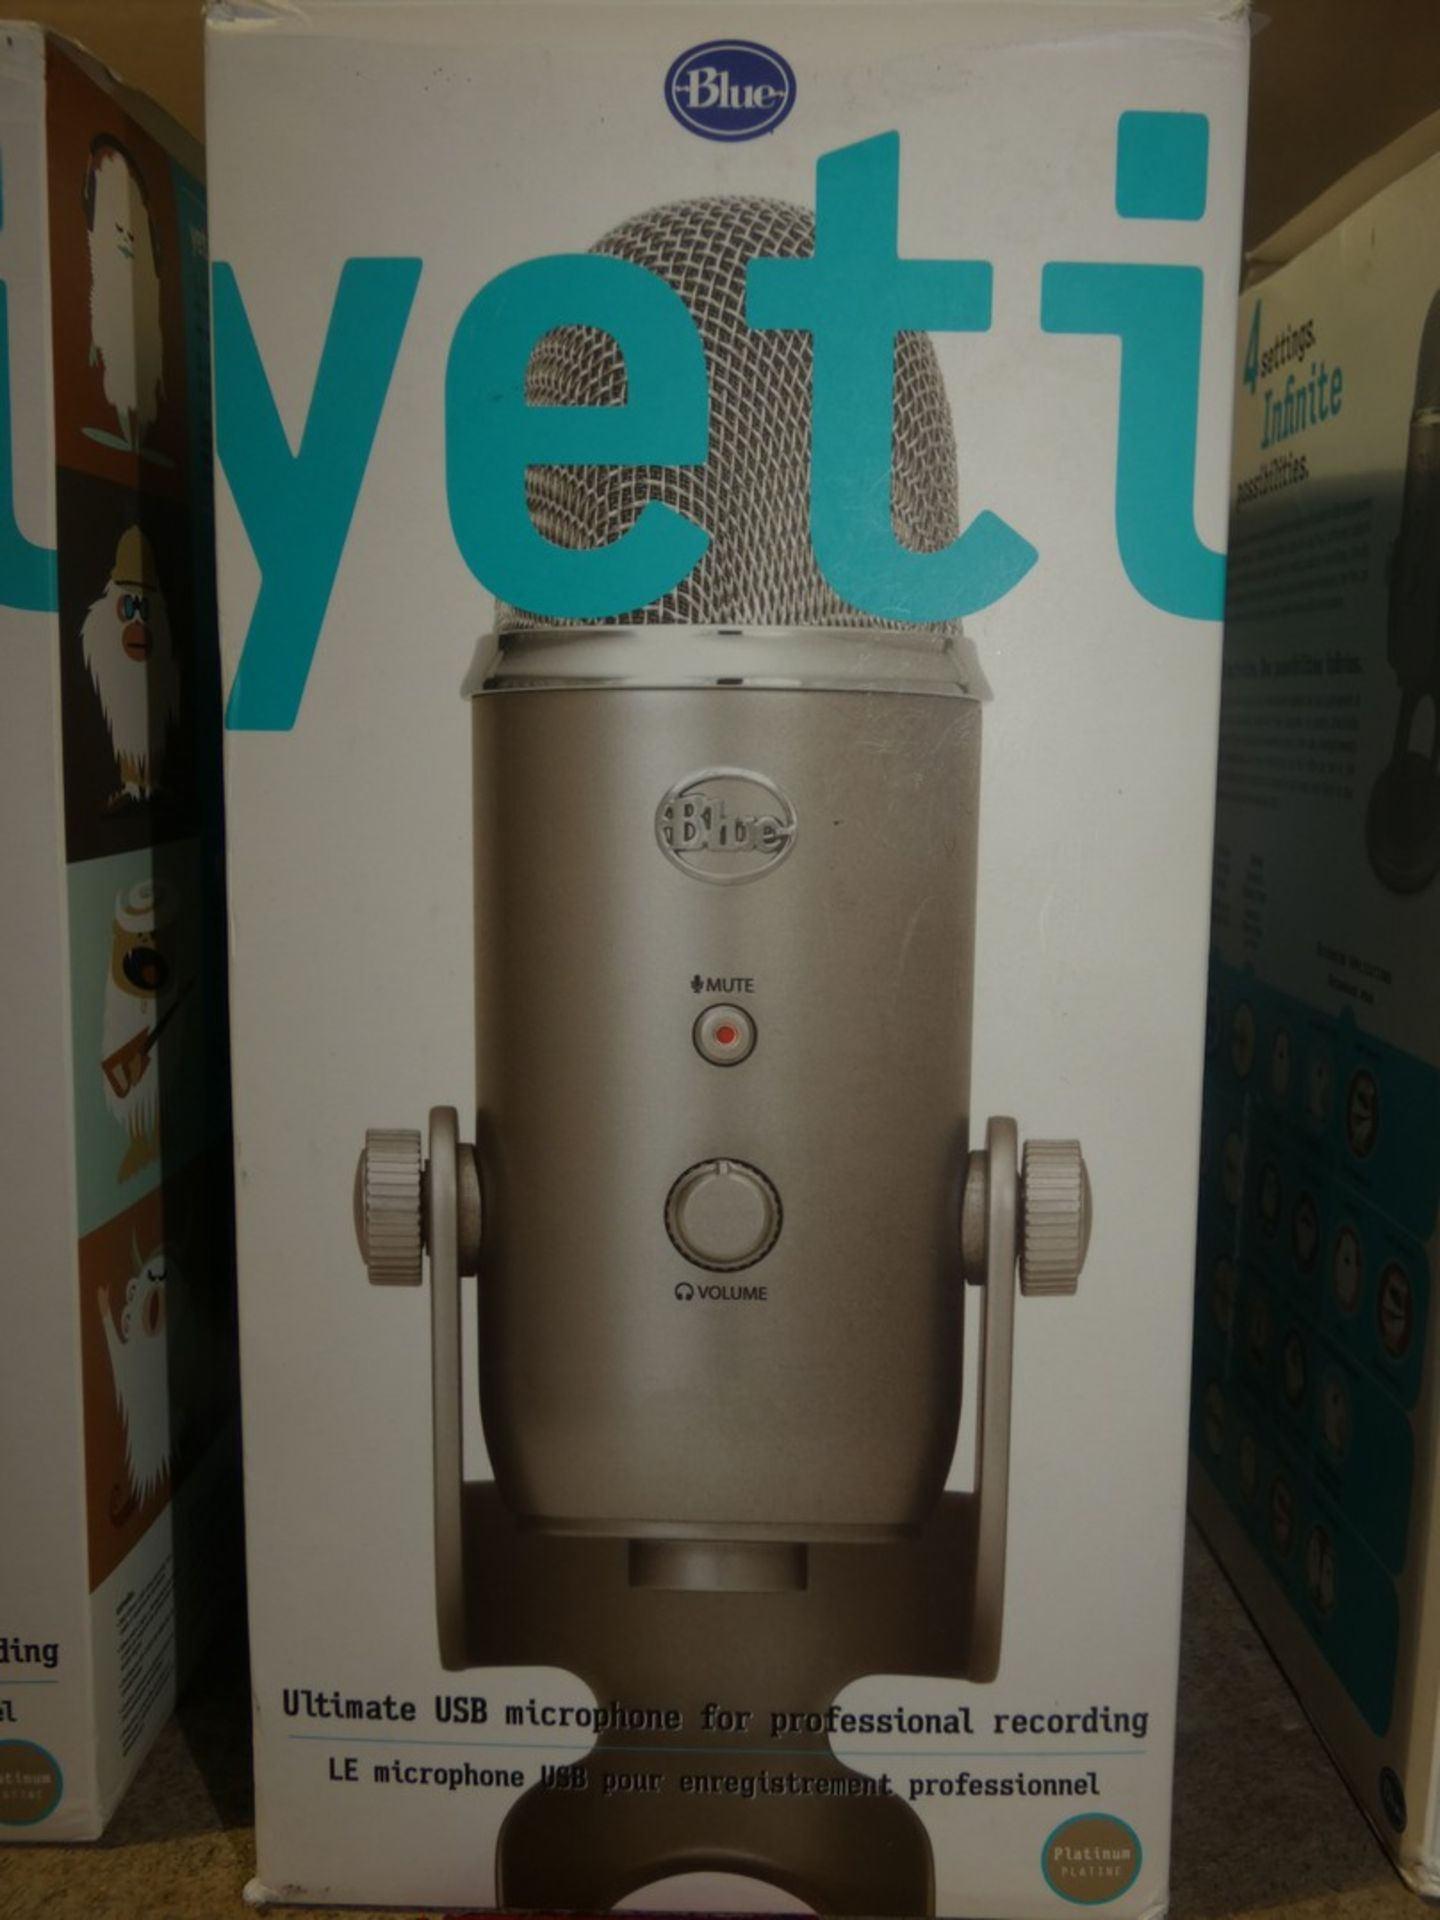 Boxed Yeti Ultimate USB Microphone For Professiona